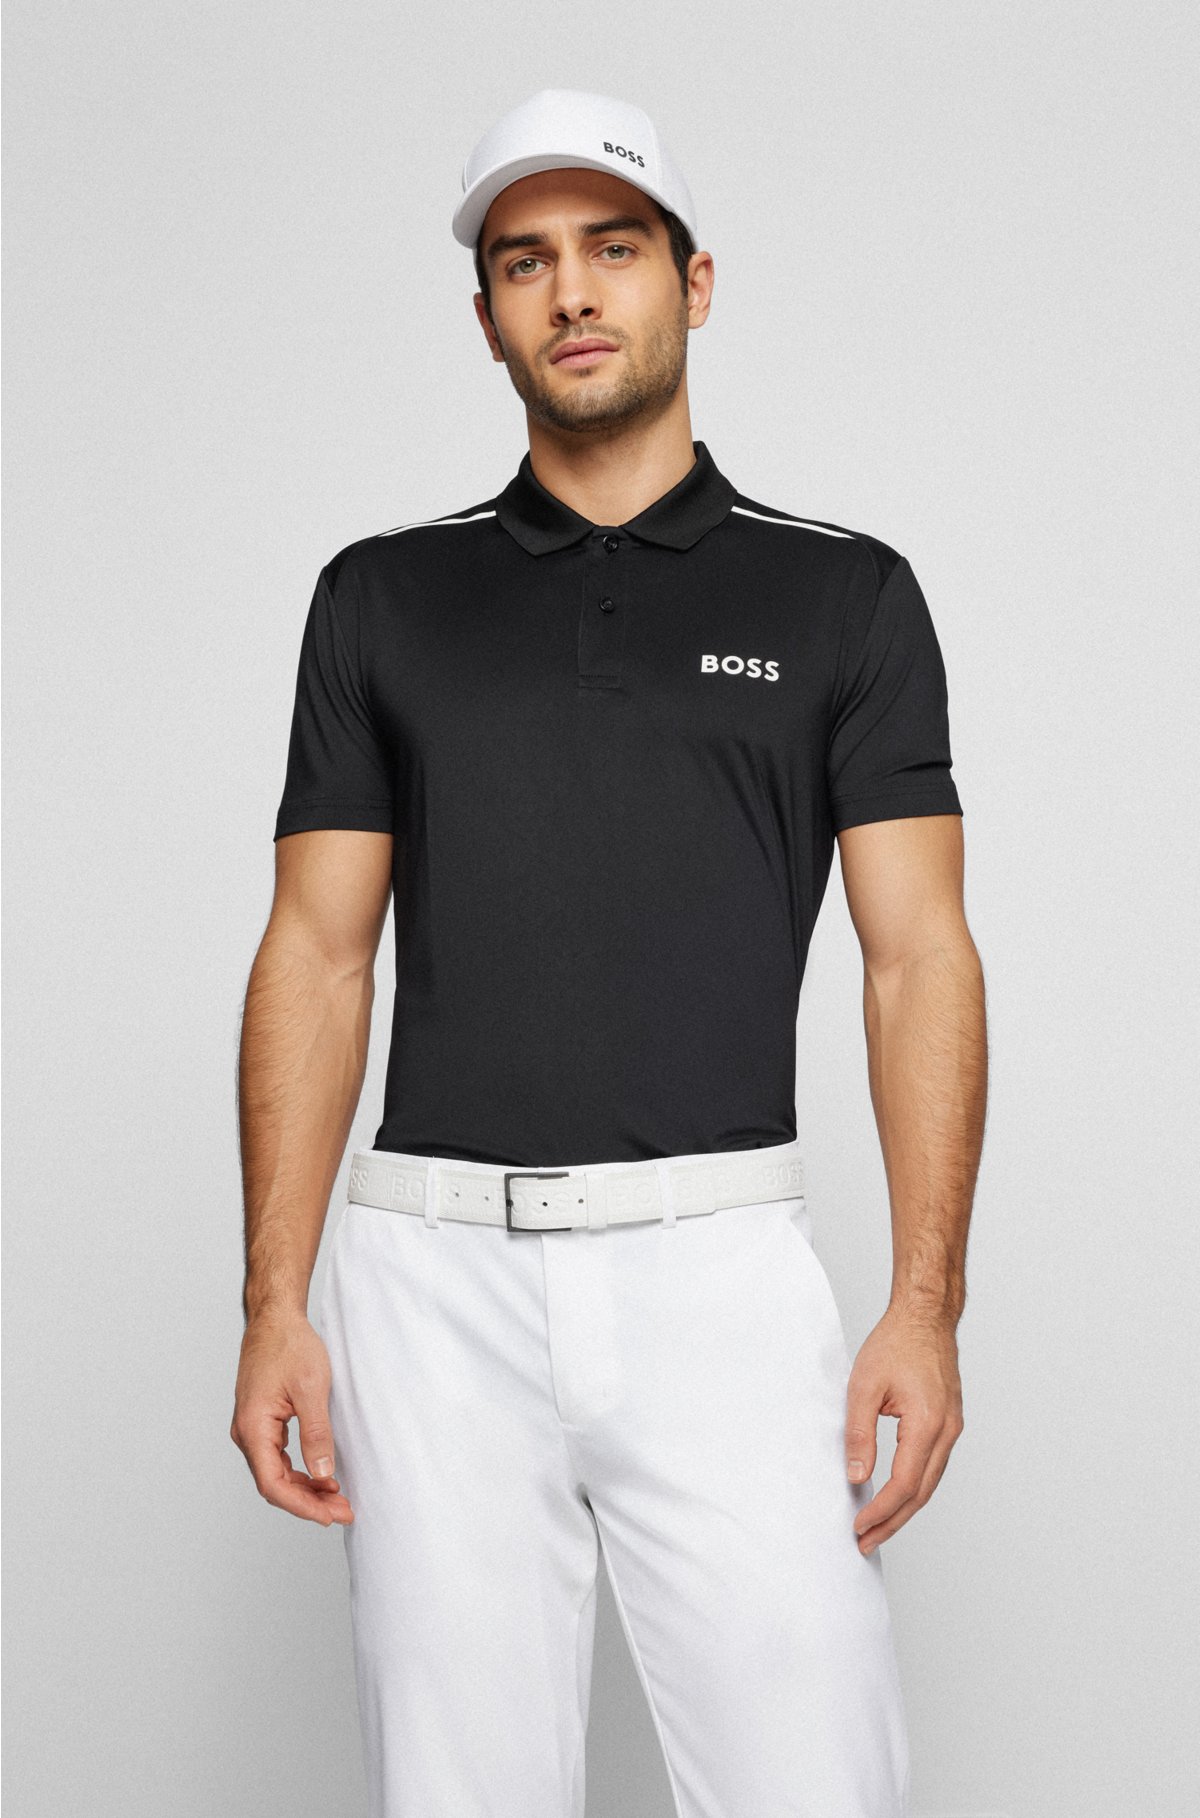 Joseph Banks onthouden Ijsbeer BOSS - Regular-fit polo shirt with contrast logos and stripes